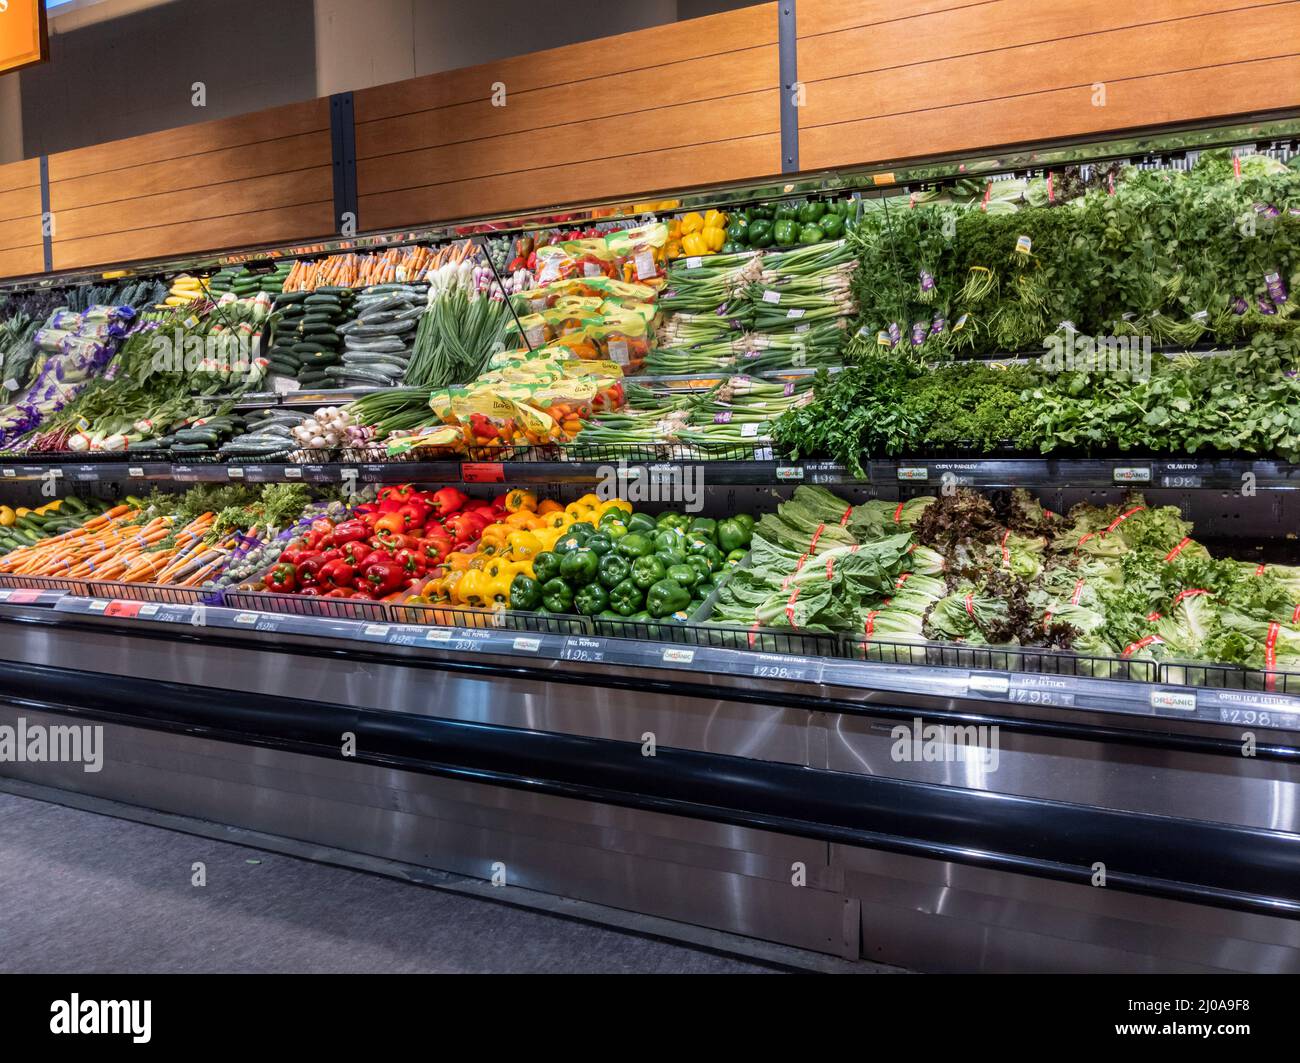 Beautiful fresh produce departments in supermarkets? It's real